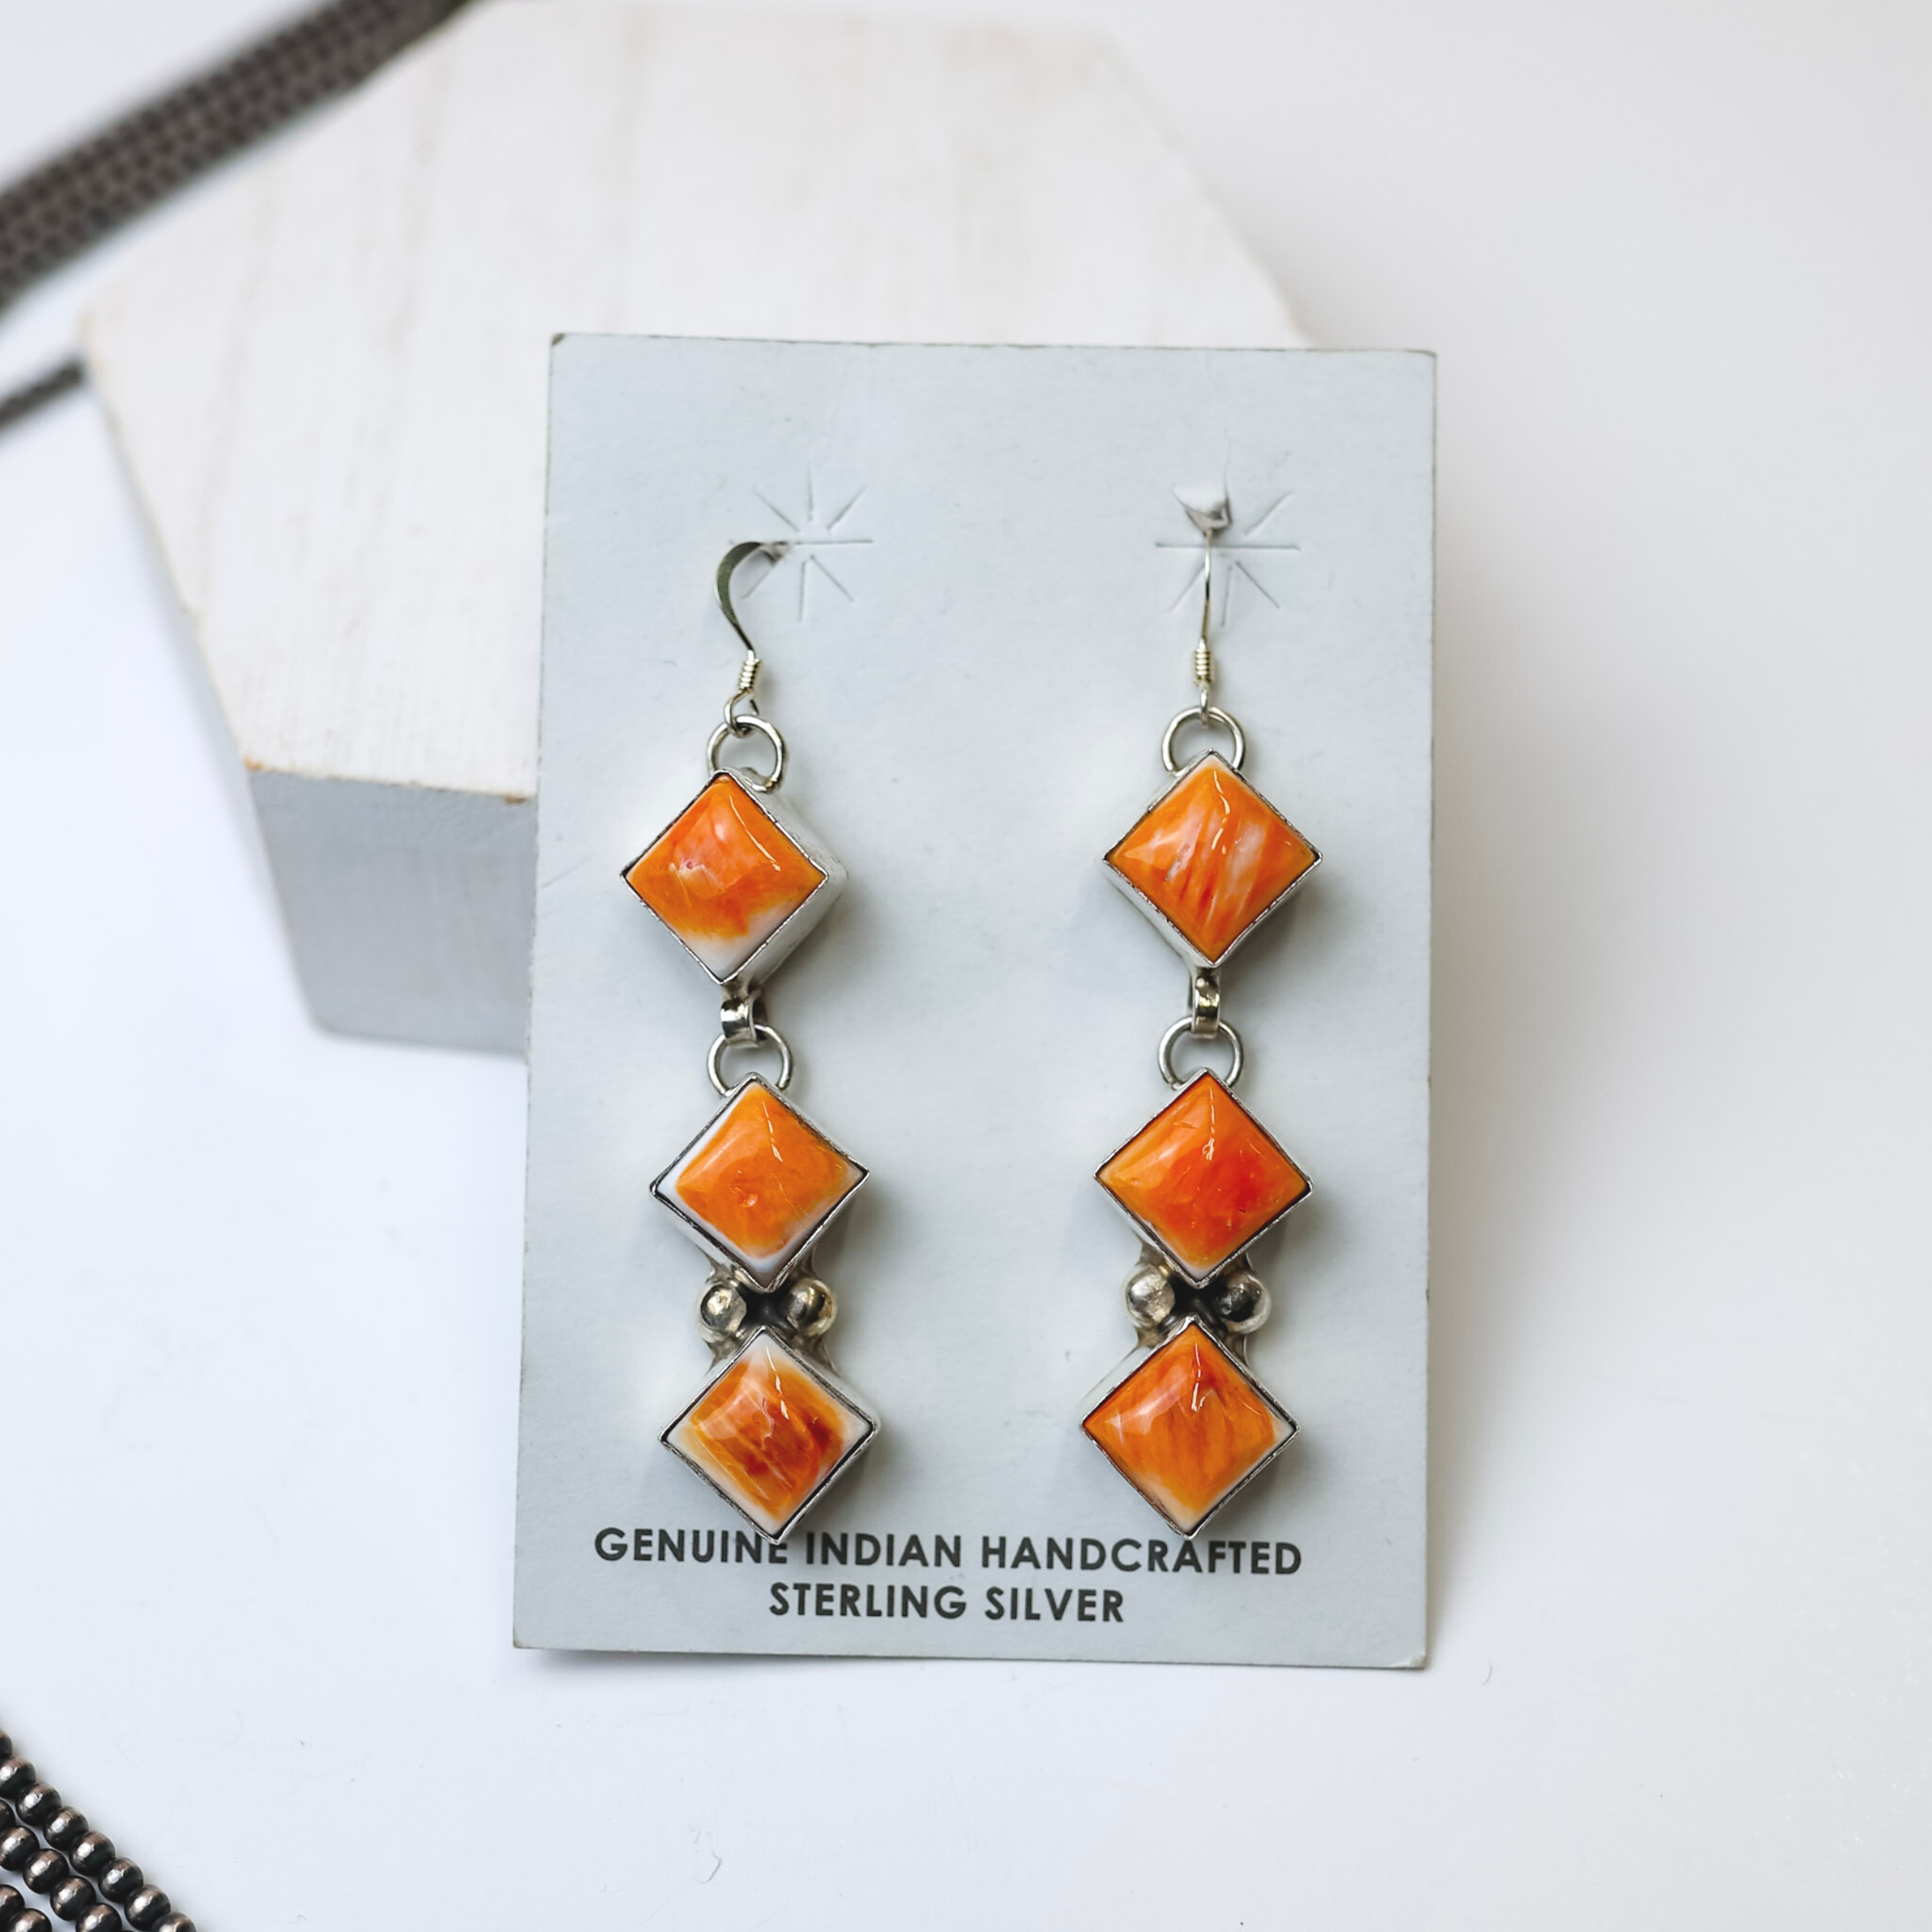 Gabby Spencer Navajo Handmade Orange Spiny Oyster Three Stone Drop Earrings are centered in the middle of the picture, with navajo pearls laid to the left of the earrings. All is on a white background. 